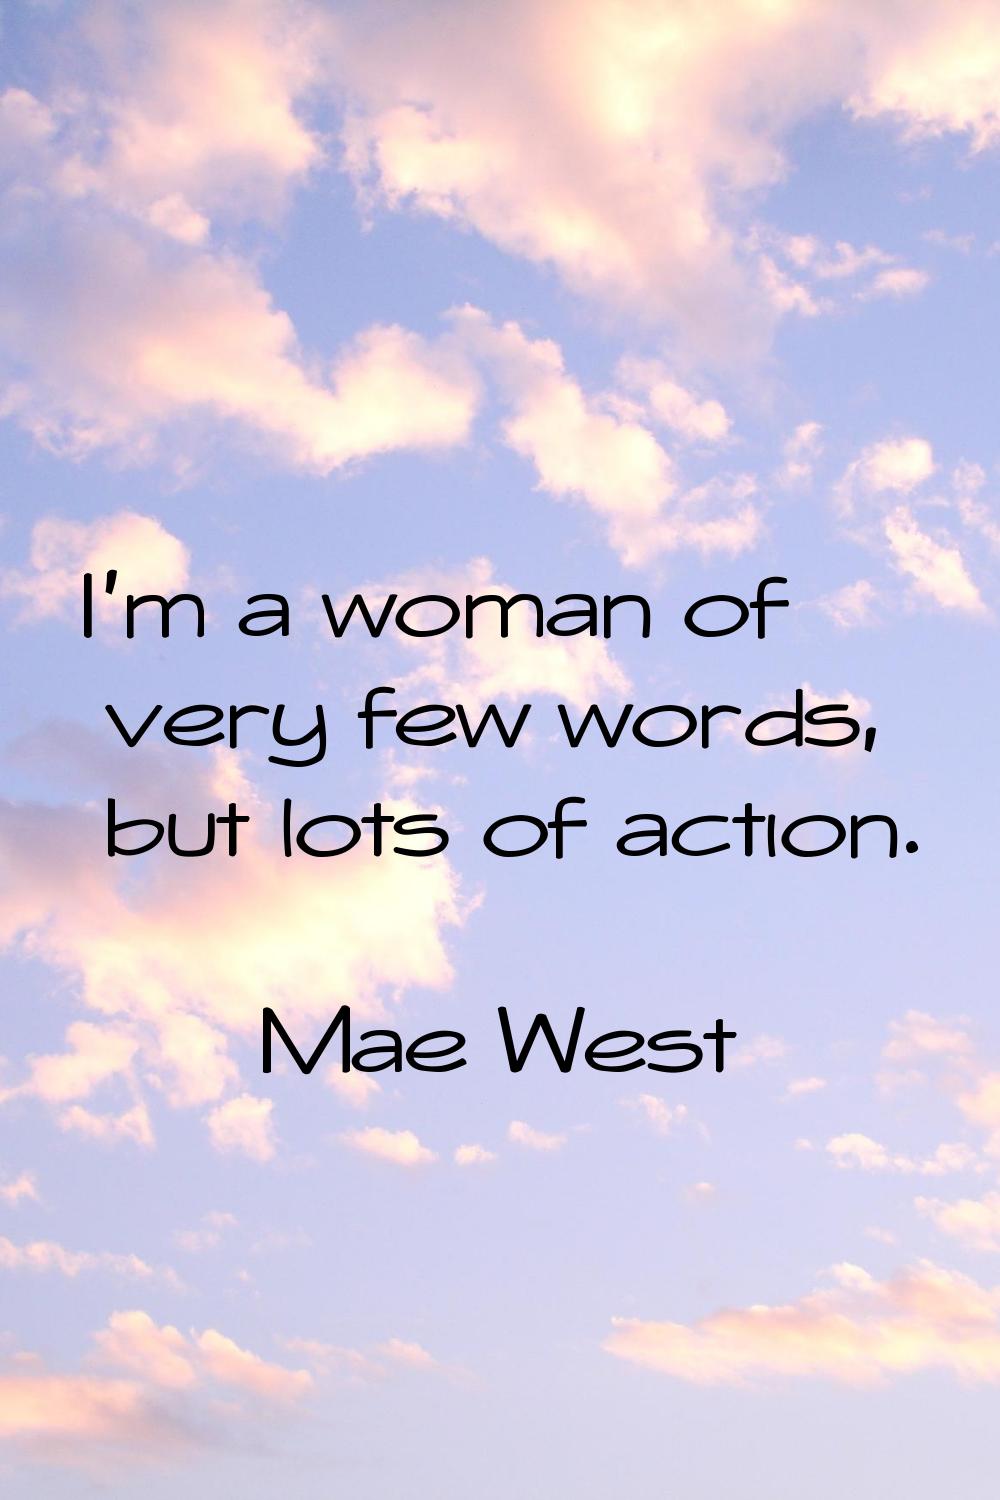 I'm a woman of very few words, but lots of action.